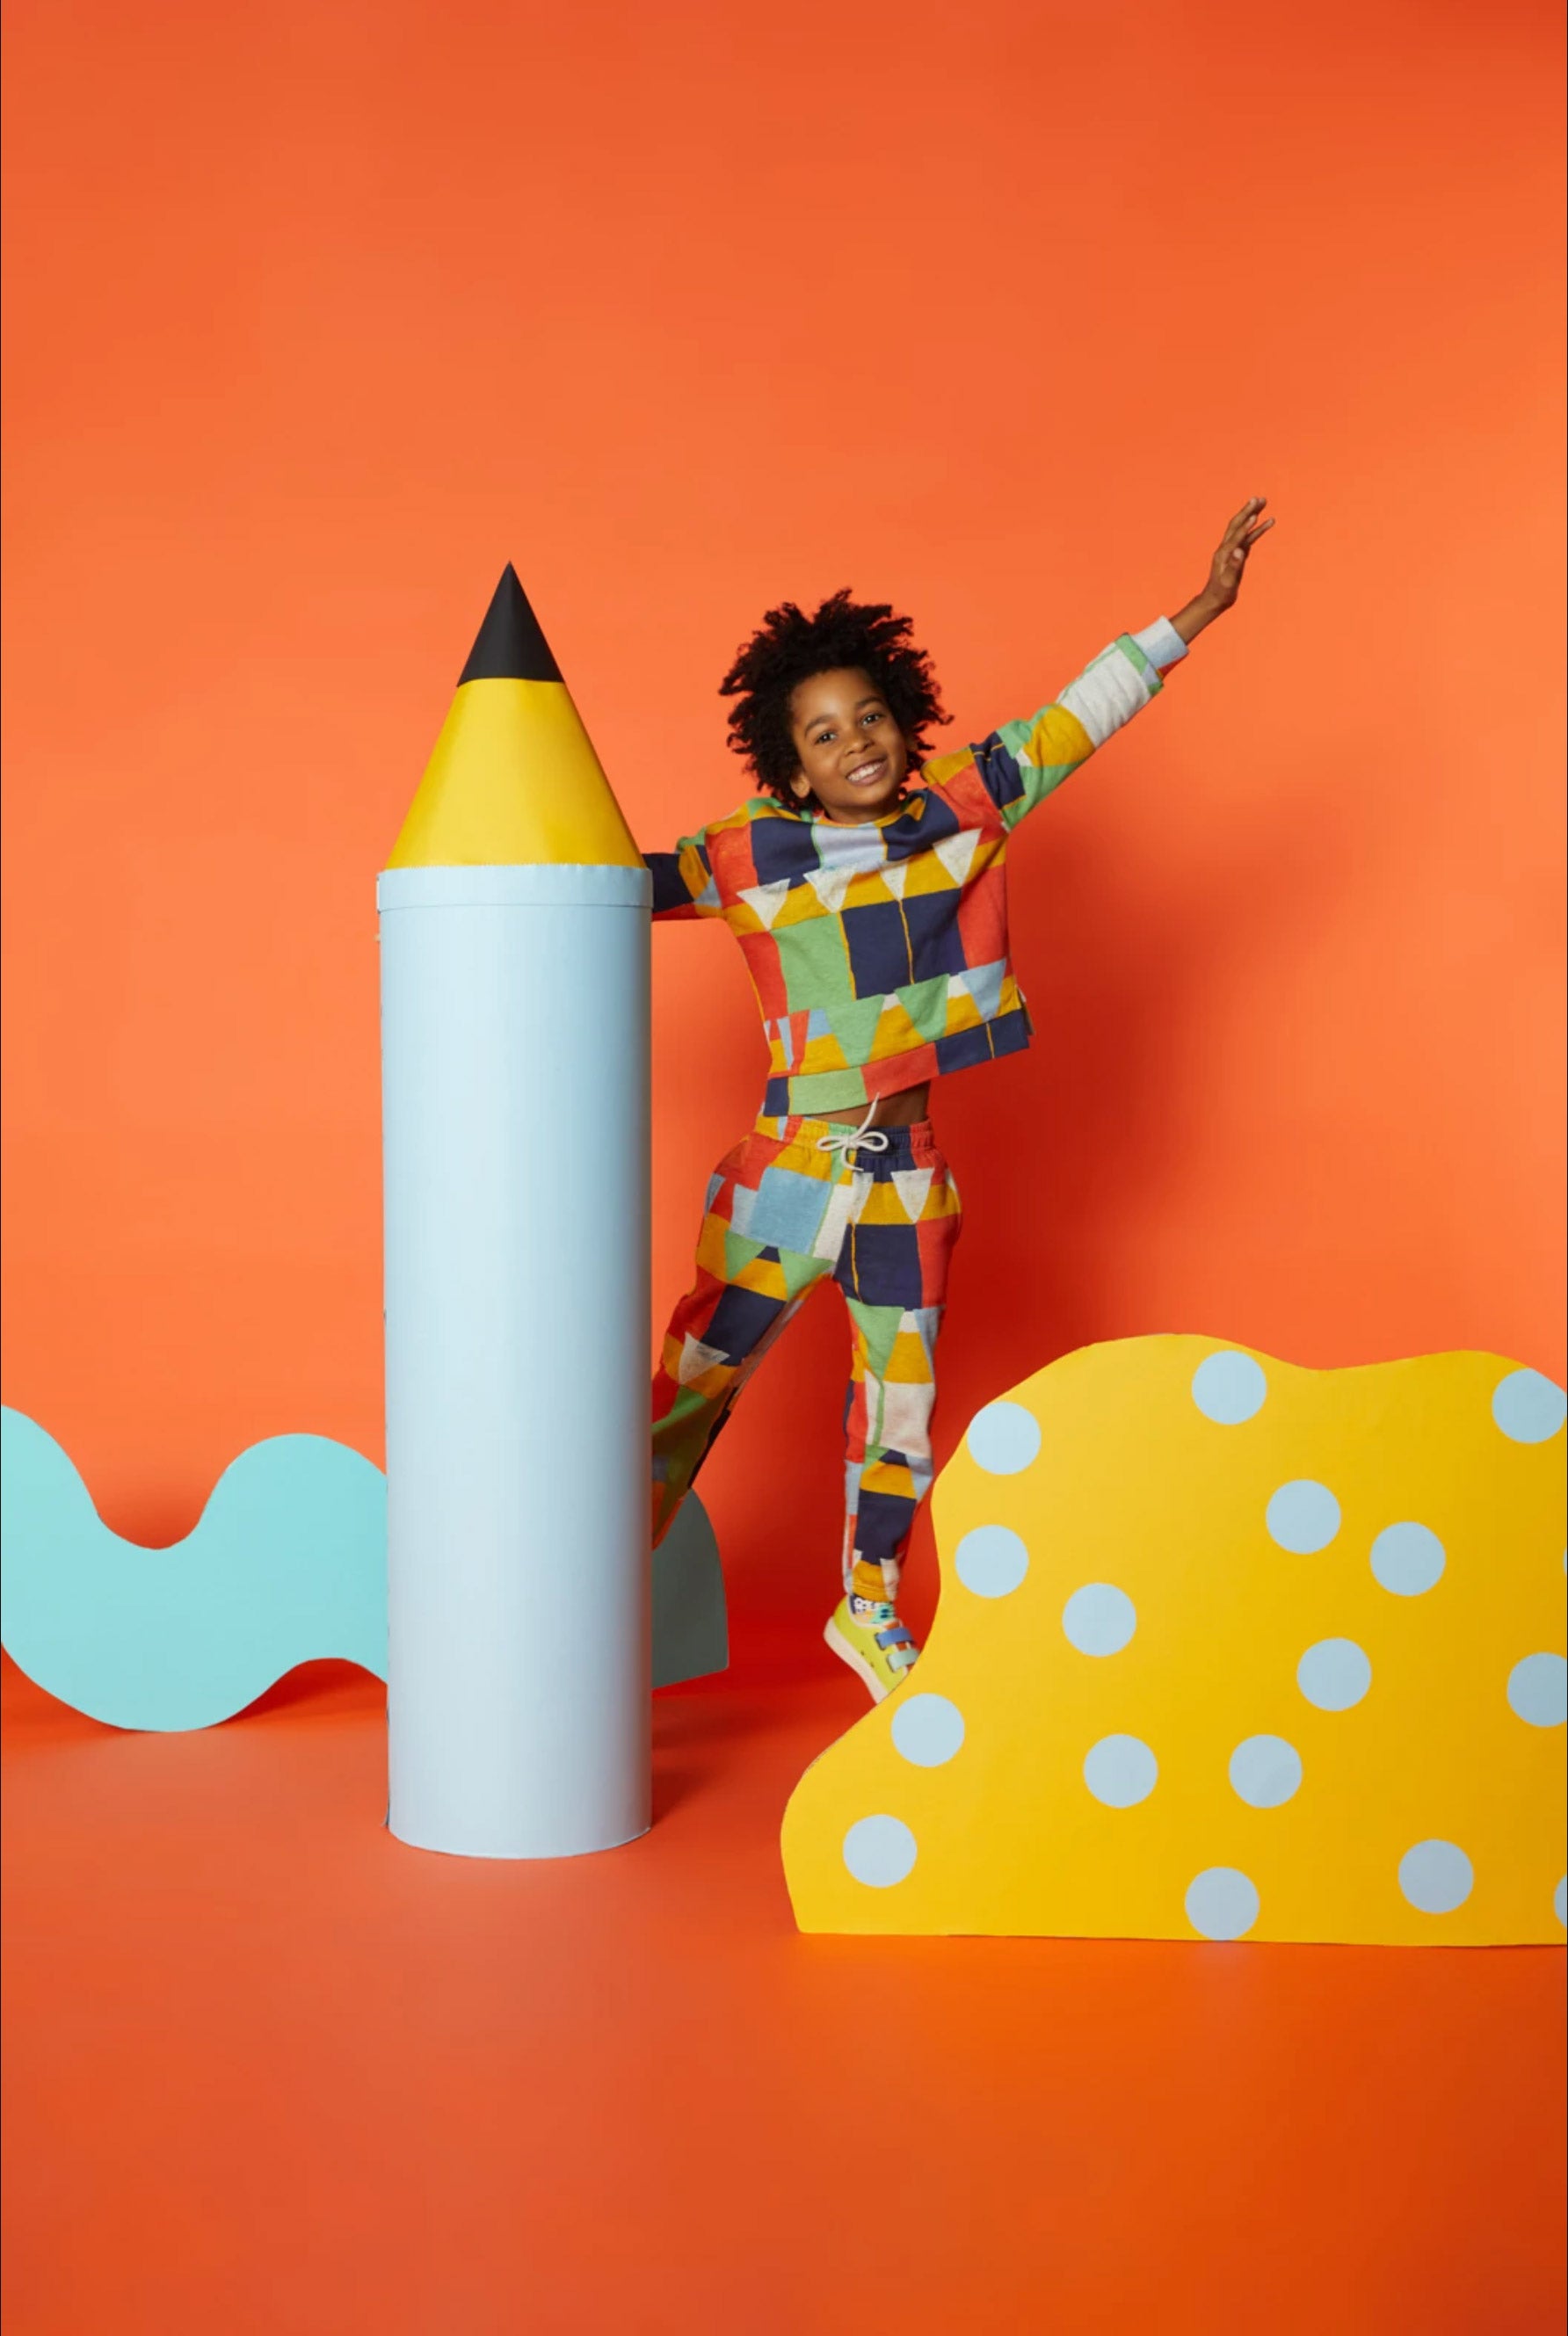 A boy in a colourful outfit jumps in front of an orange background, surrounded by a giant blue pencil prop,  wavy blue cardboard cutout prop and a yellow abstract cardboard cutout prop with blue polkadots. 